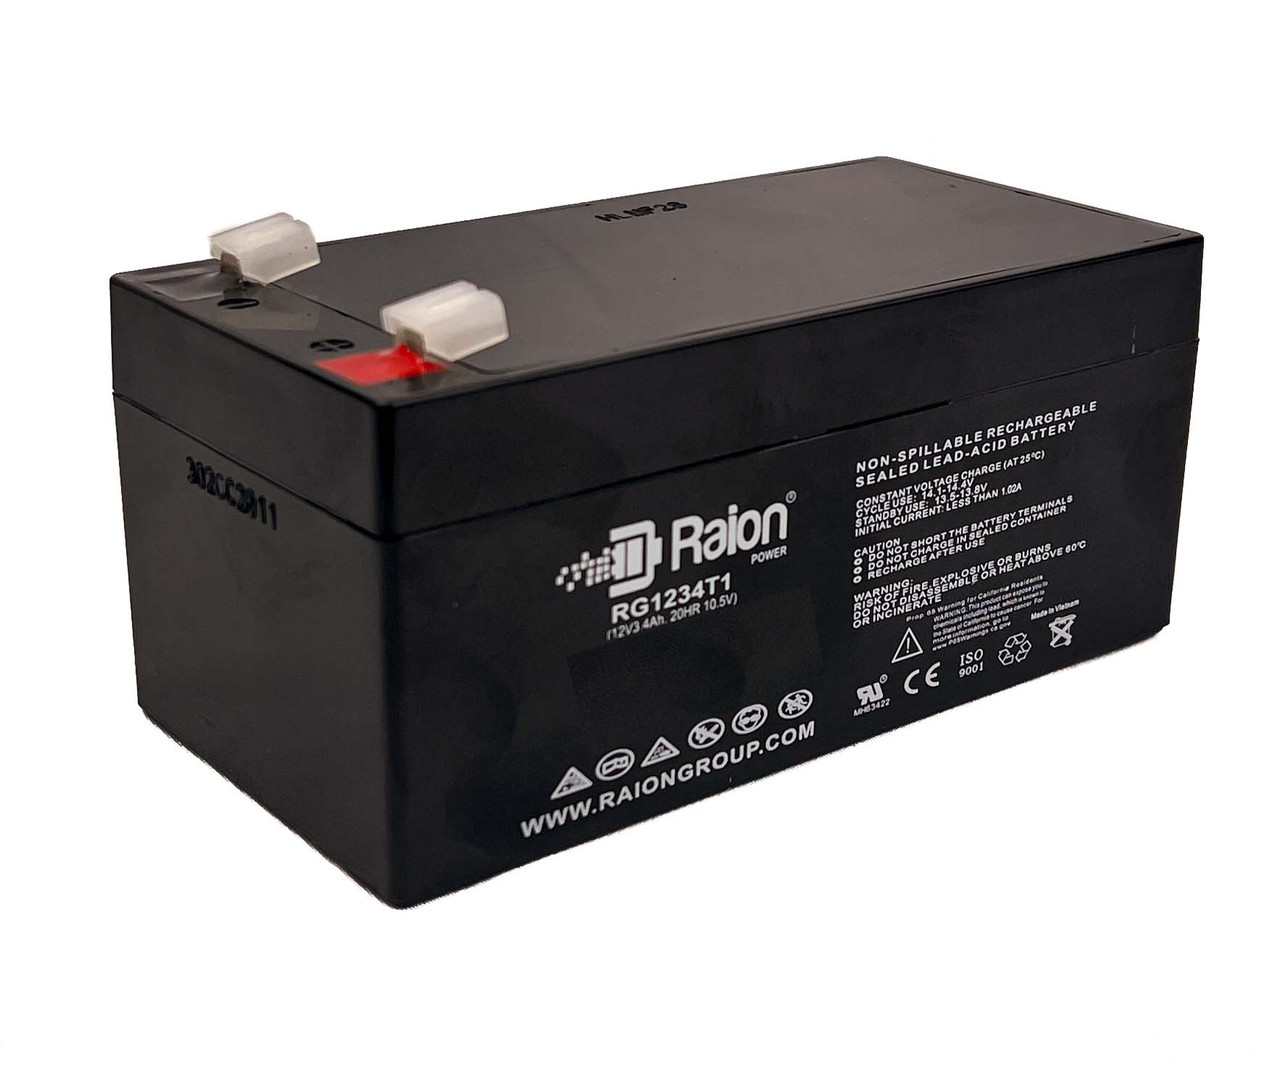 Raion Power 12V 3.4Ah Non-Spillable Replacement Battery for Criticare Systems 601, 602 IQ Poet Pulse Oximeter